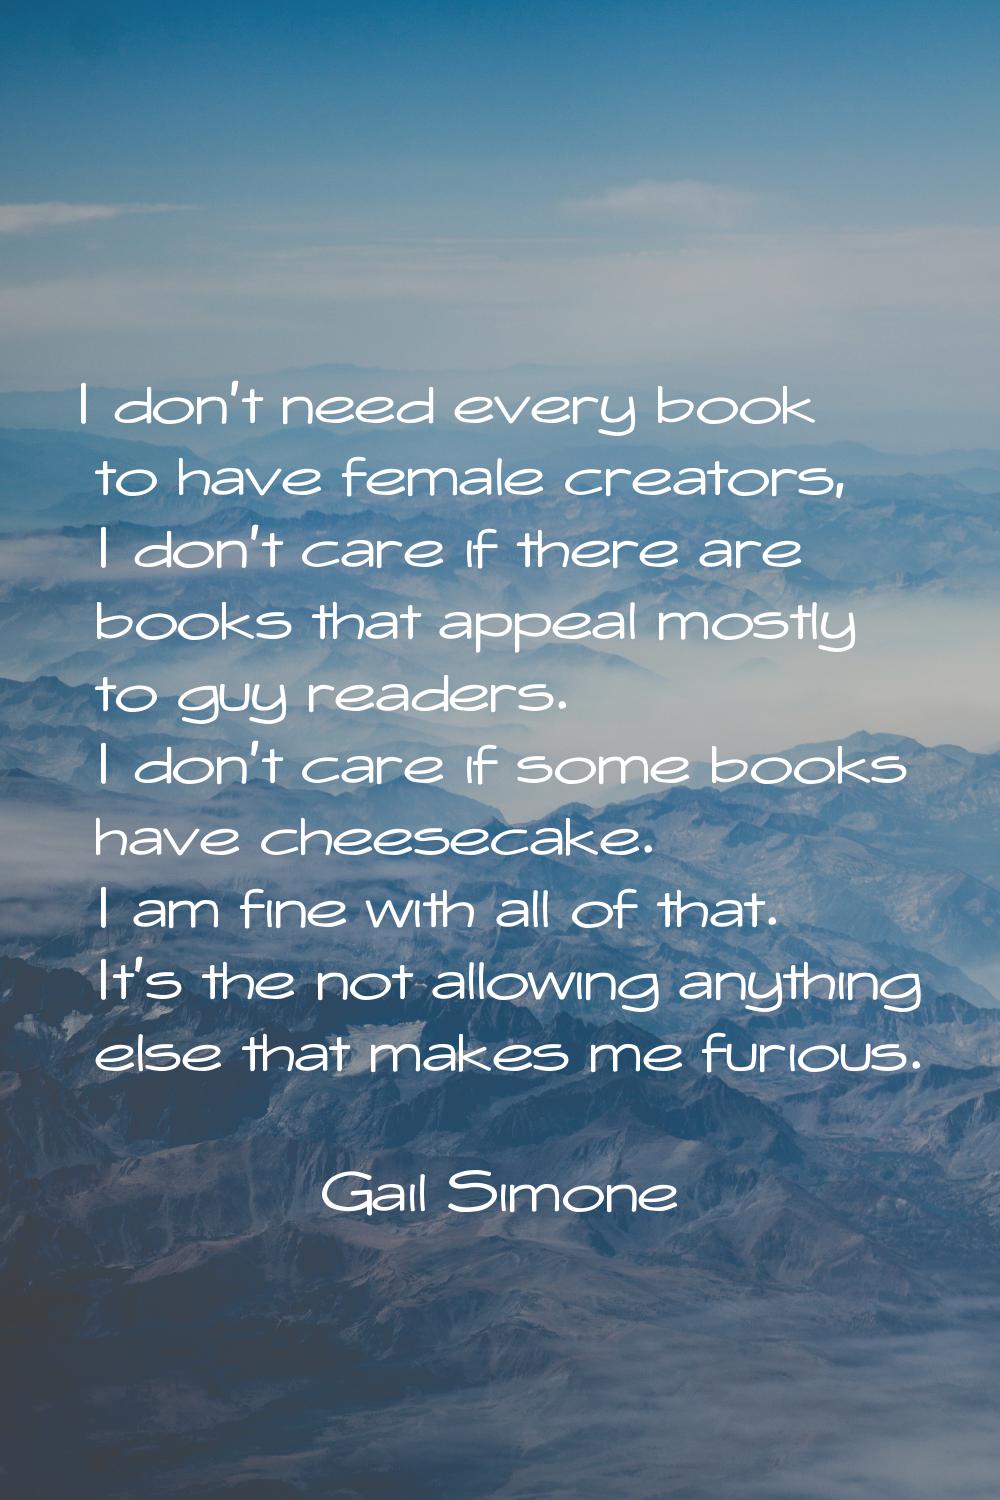 I don't need every book to have female creators, I don't care if there are books that appeal mostly